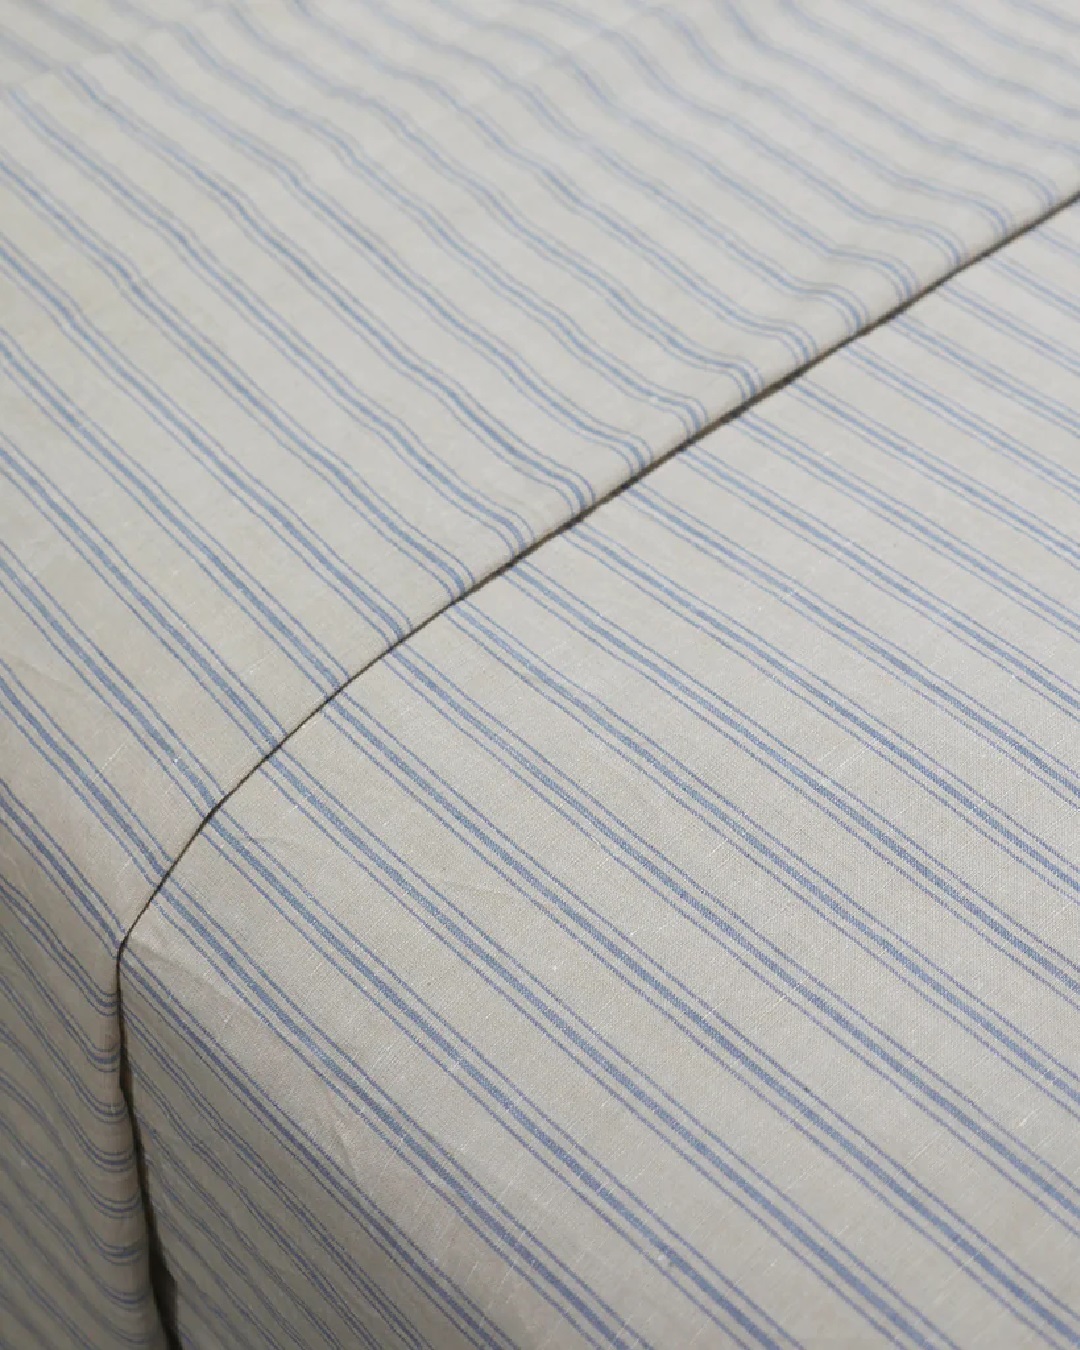 Striped blue and white sheets on bed